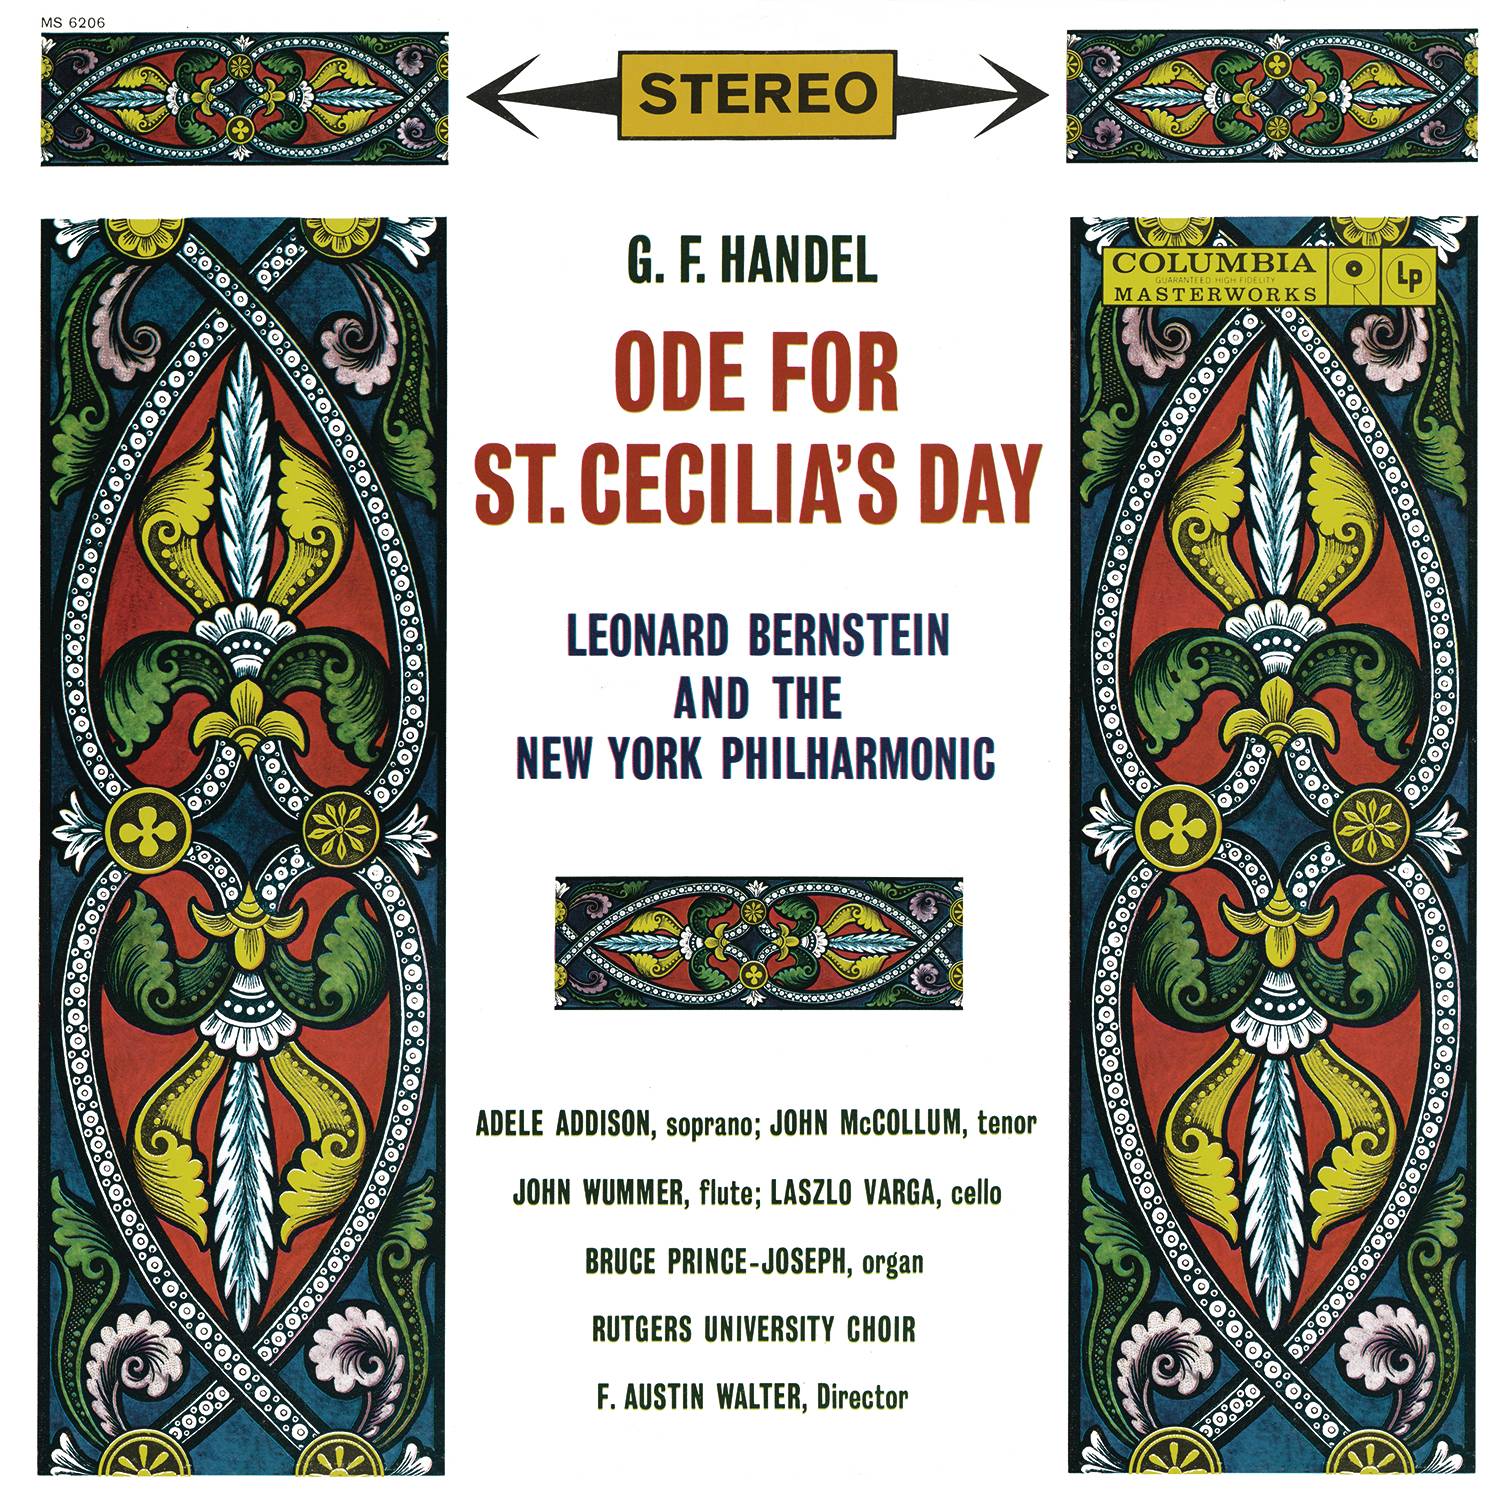 Ode For St. Cecilia's Day, HWV 76:No. 2, From harmony, from heav'nly harmony